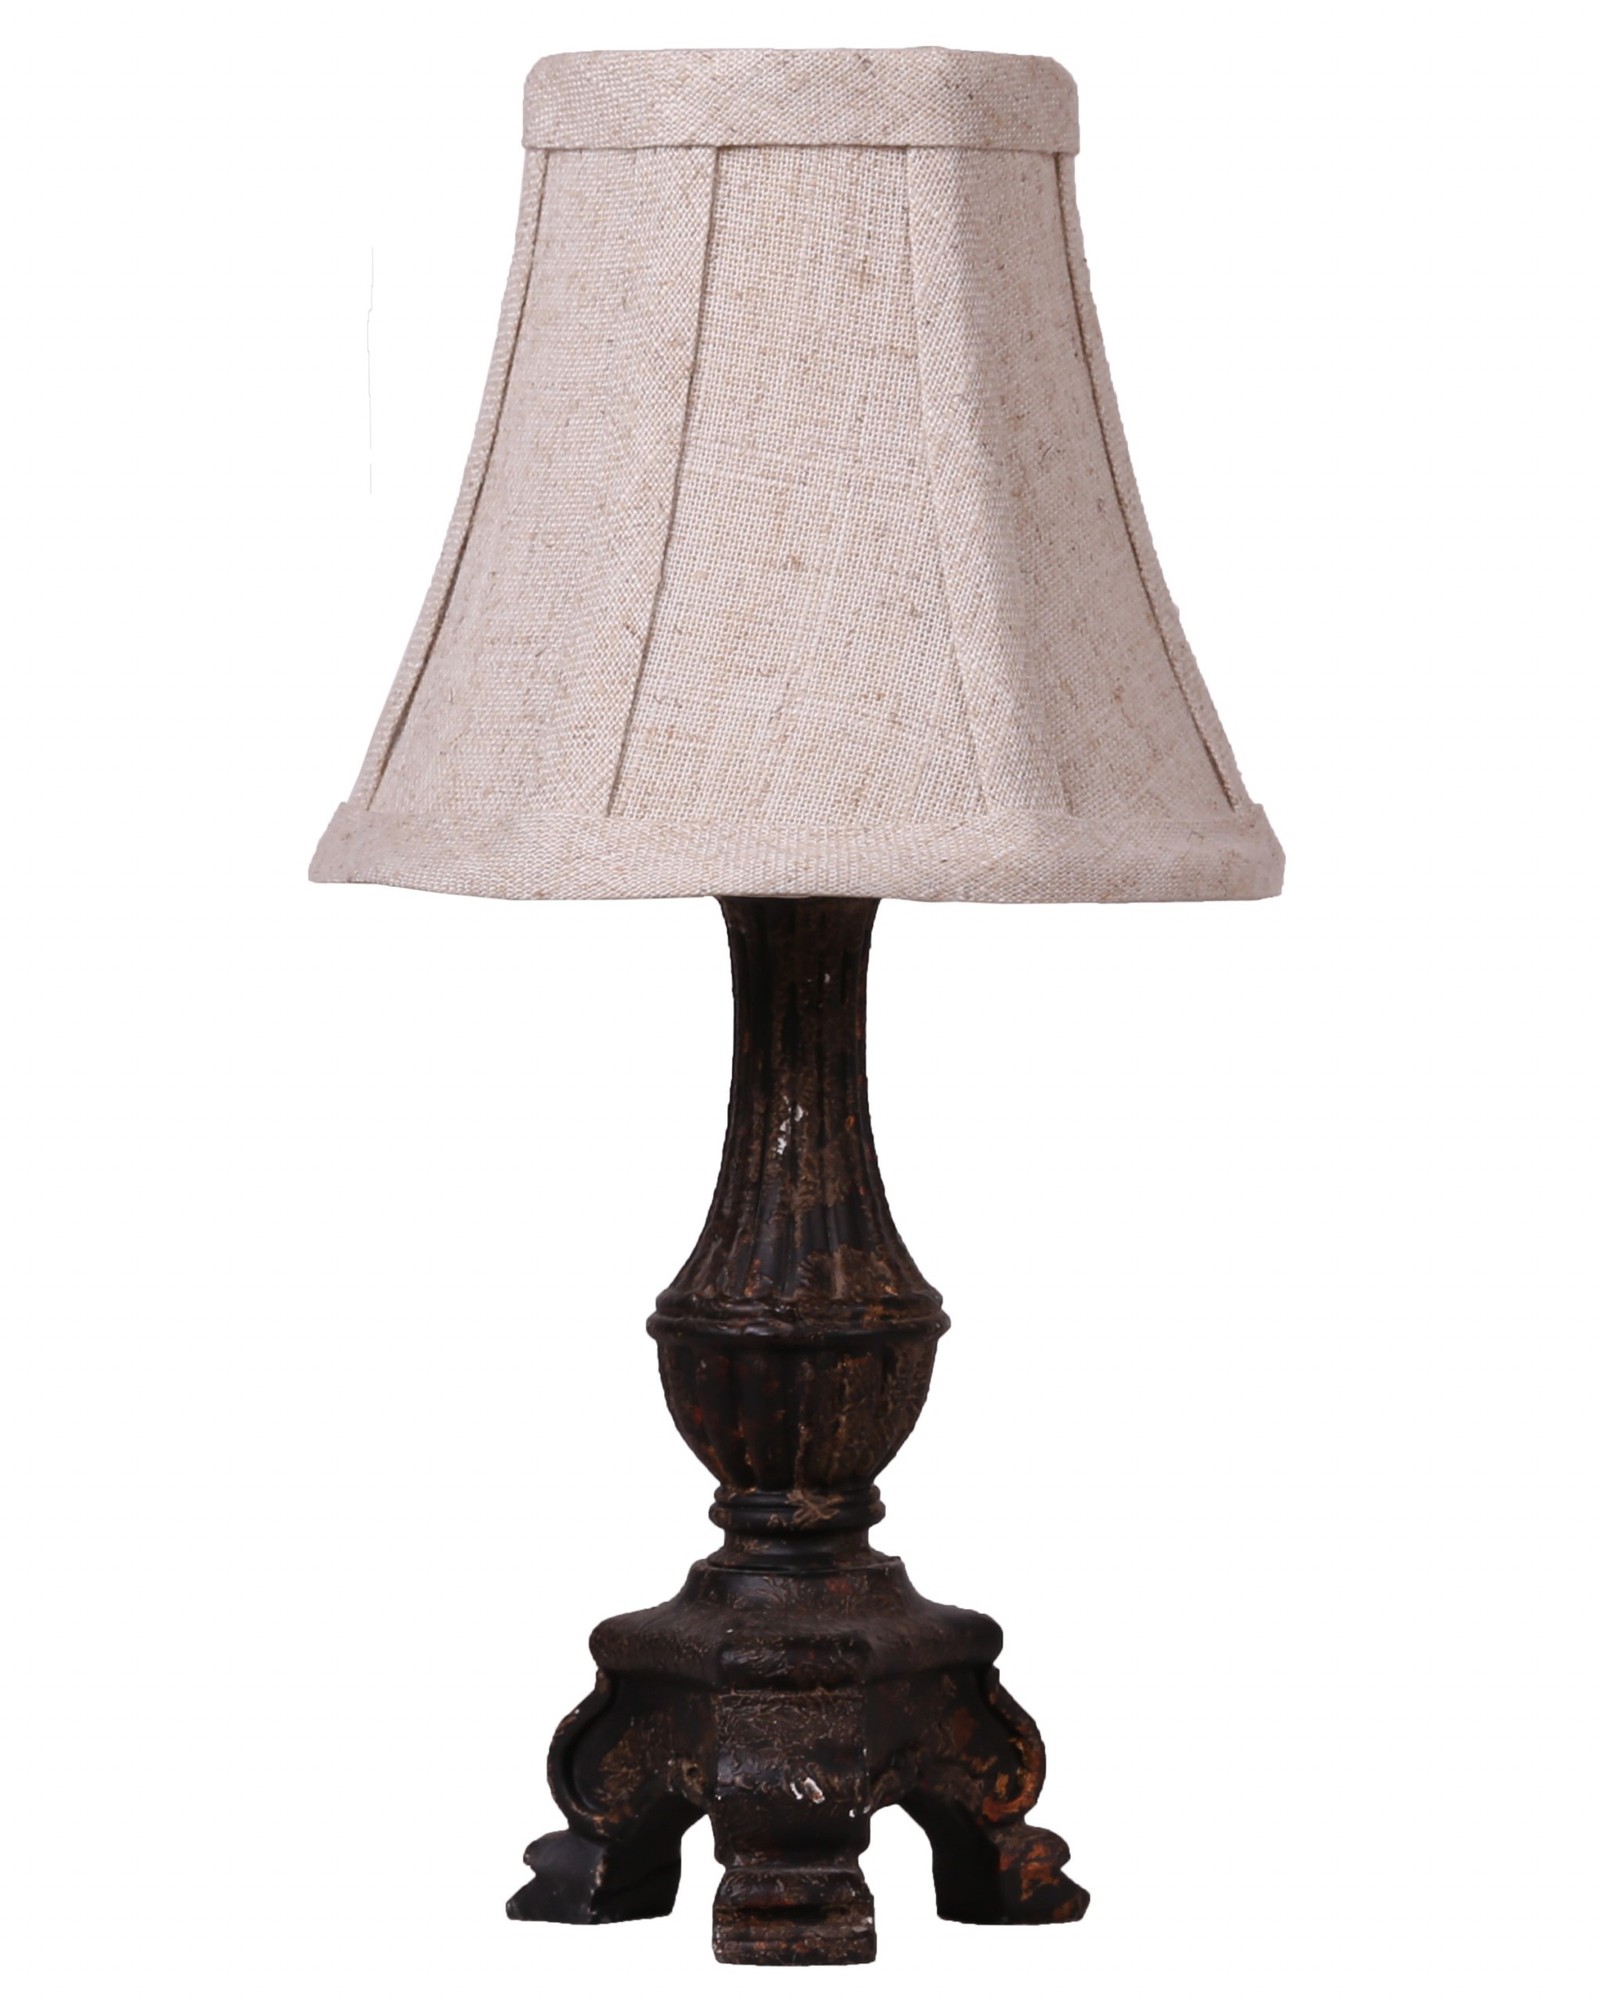 Dark Grey French Inspired Accent Lamp with Tailored Shade